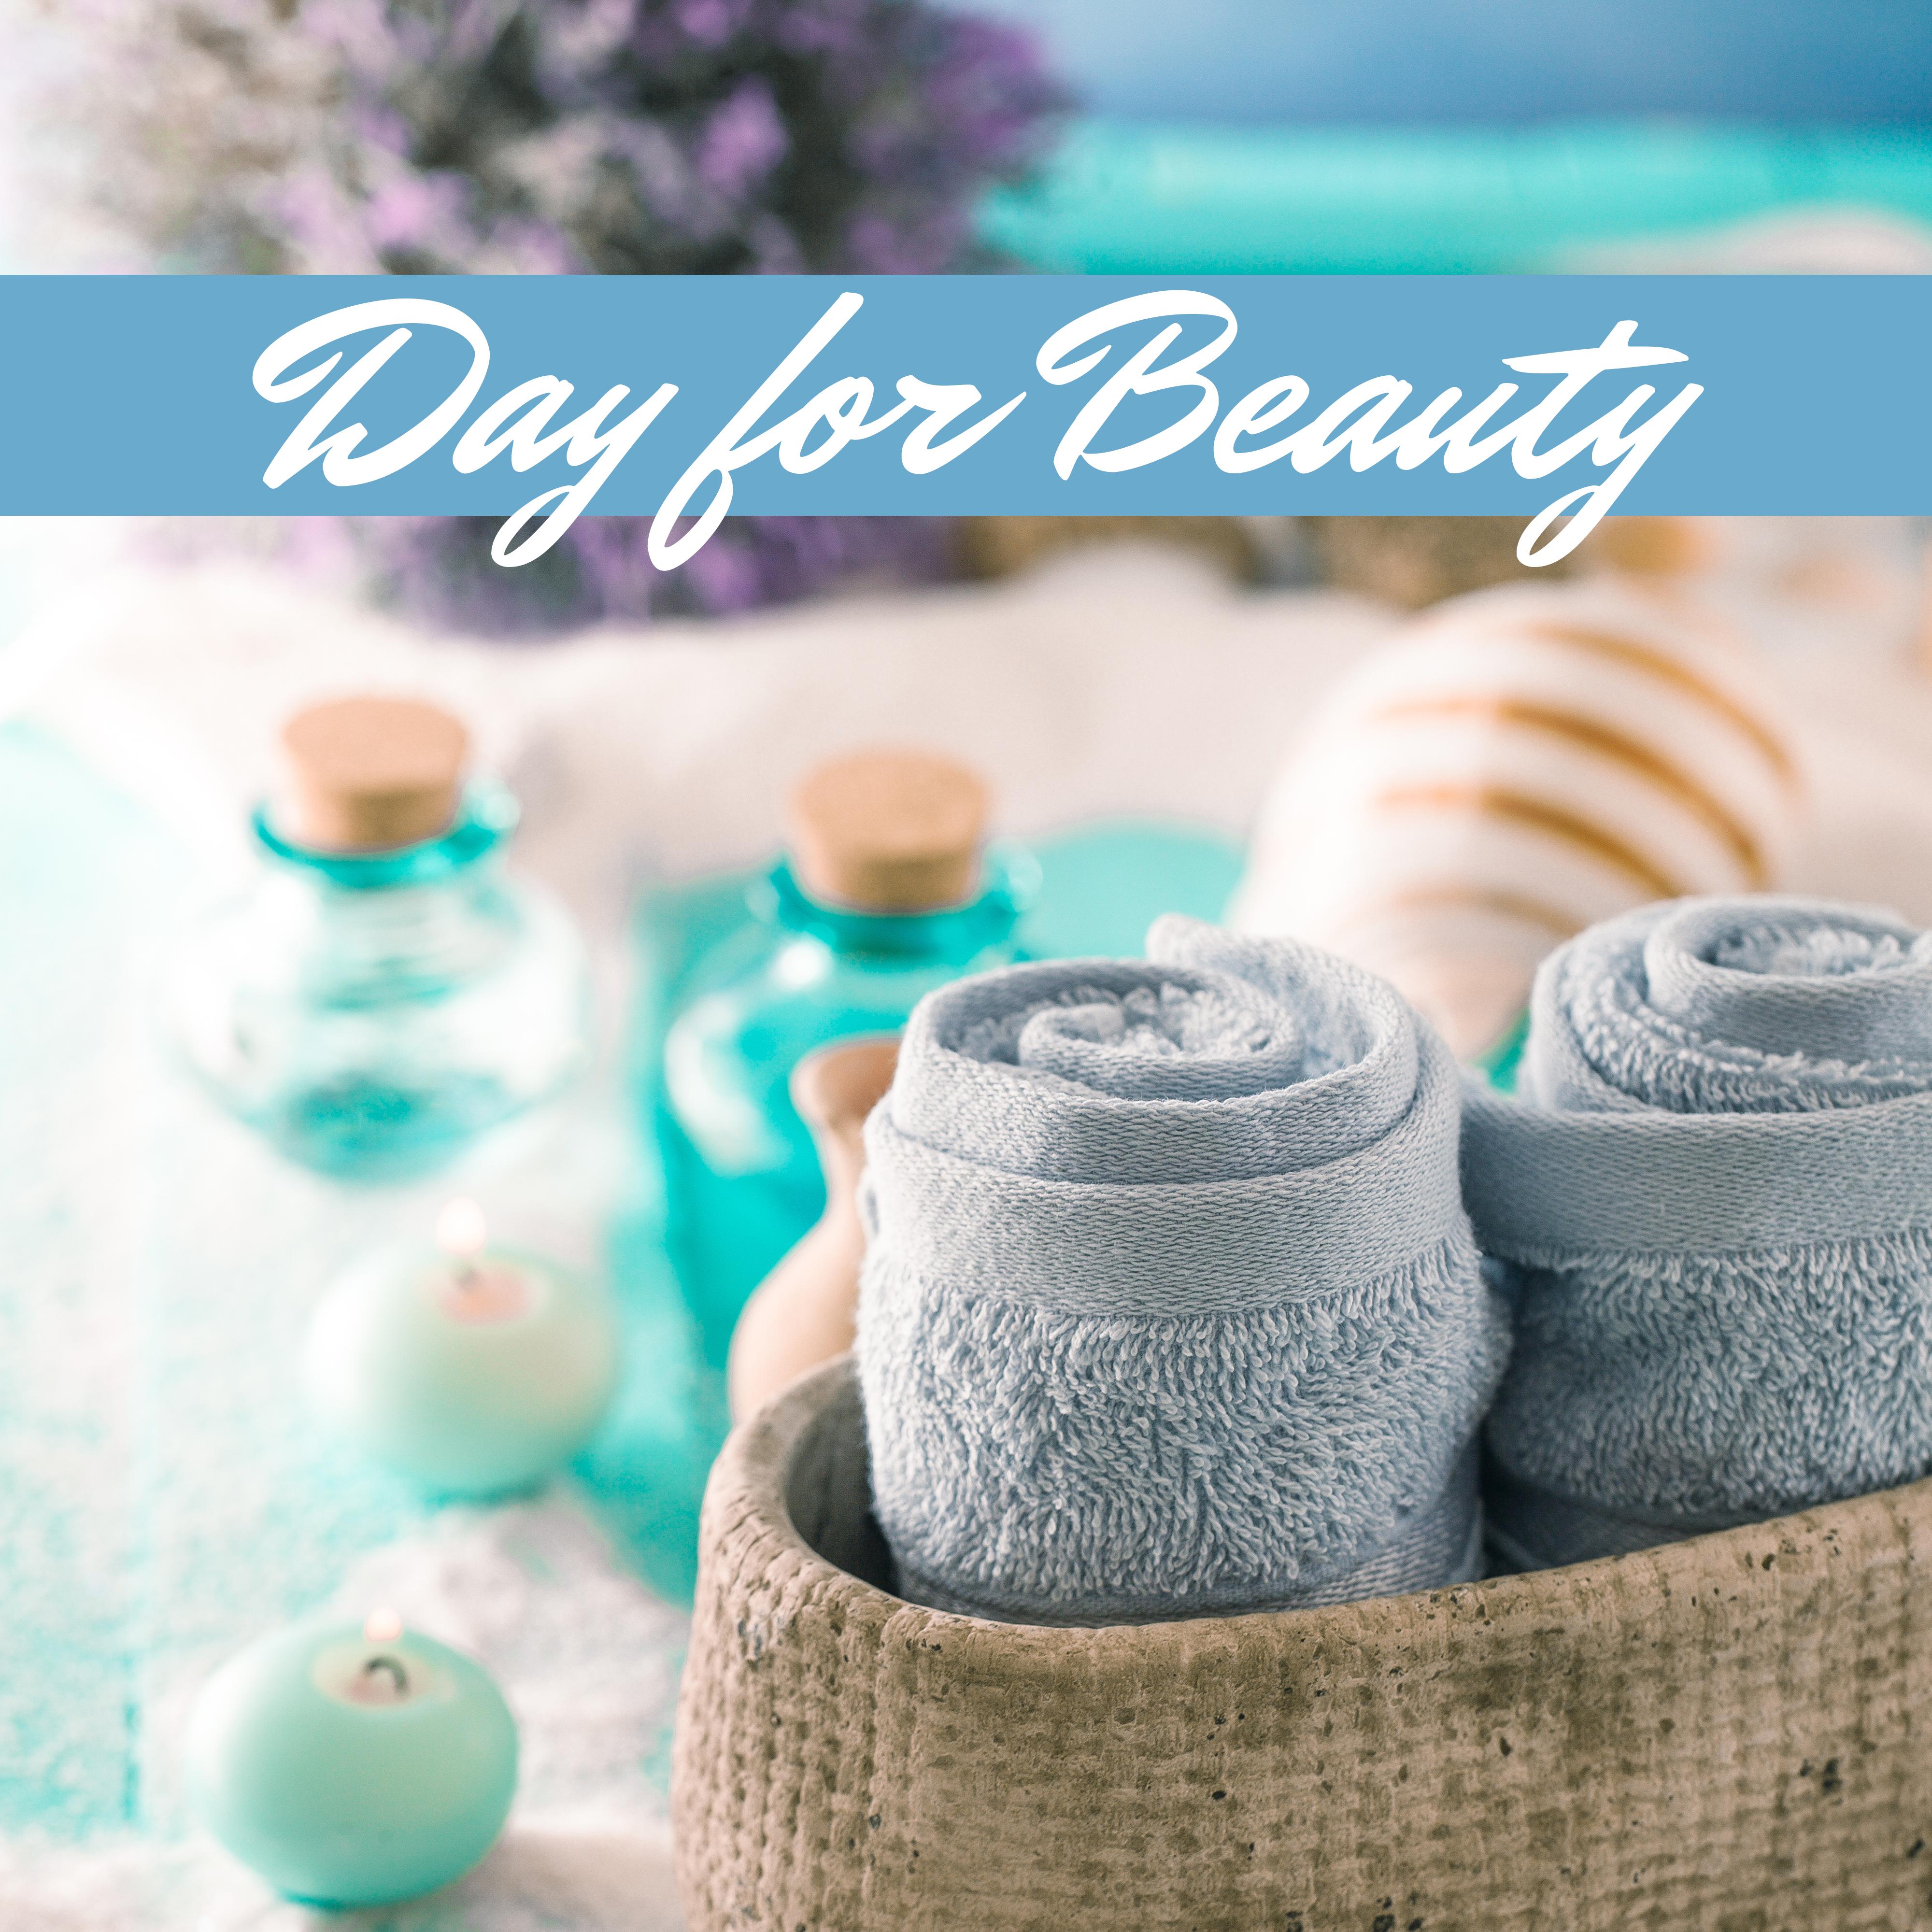 Day for Beauty - 15 Tracks for Spa, Massage, Wellness, Cosmetic, Beauty and Rejuvenating Treatments